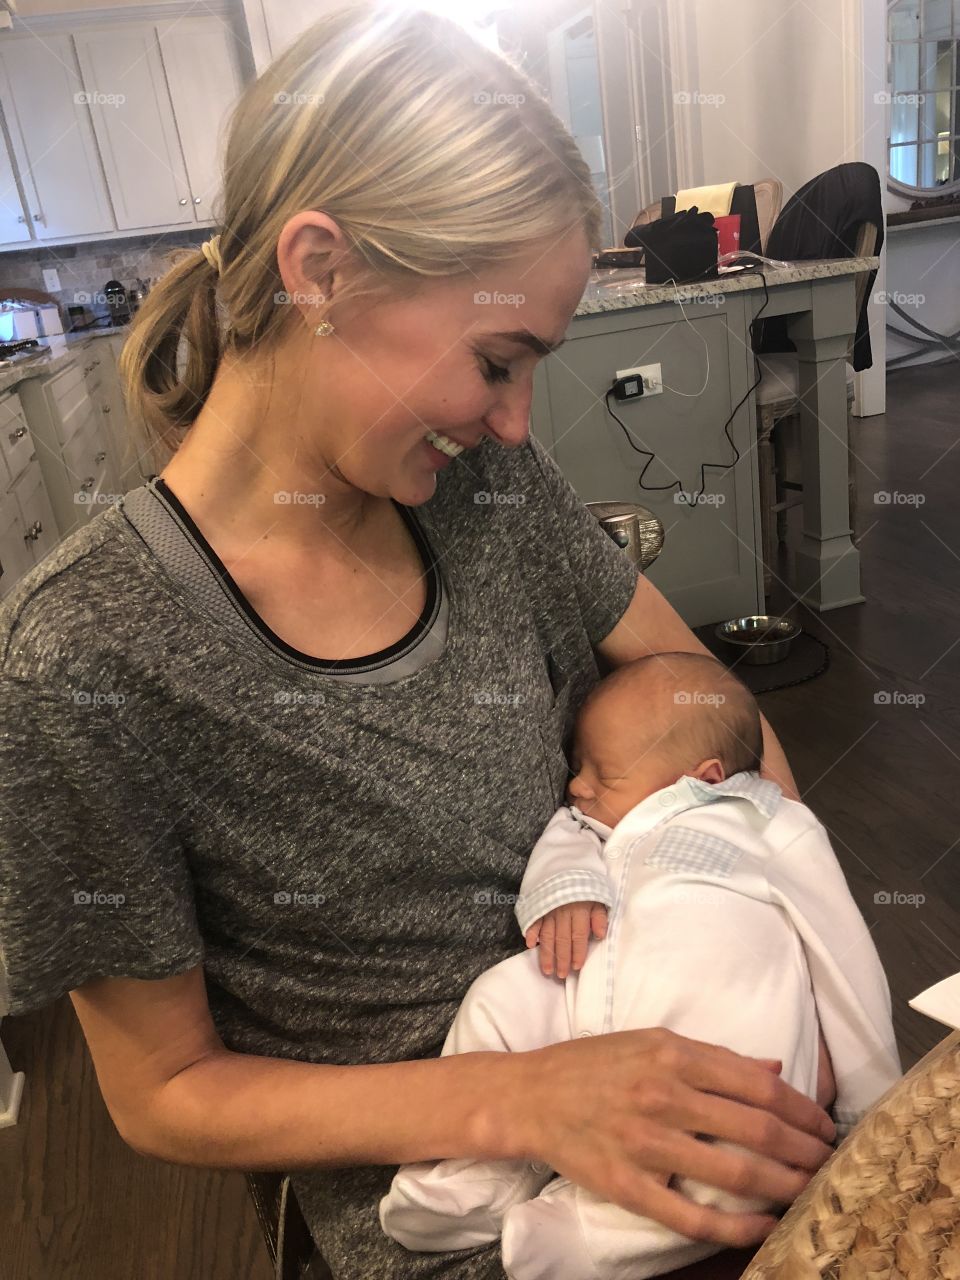 Holding a baby 